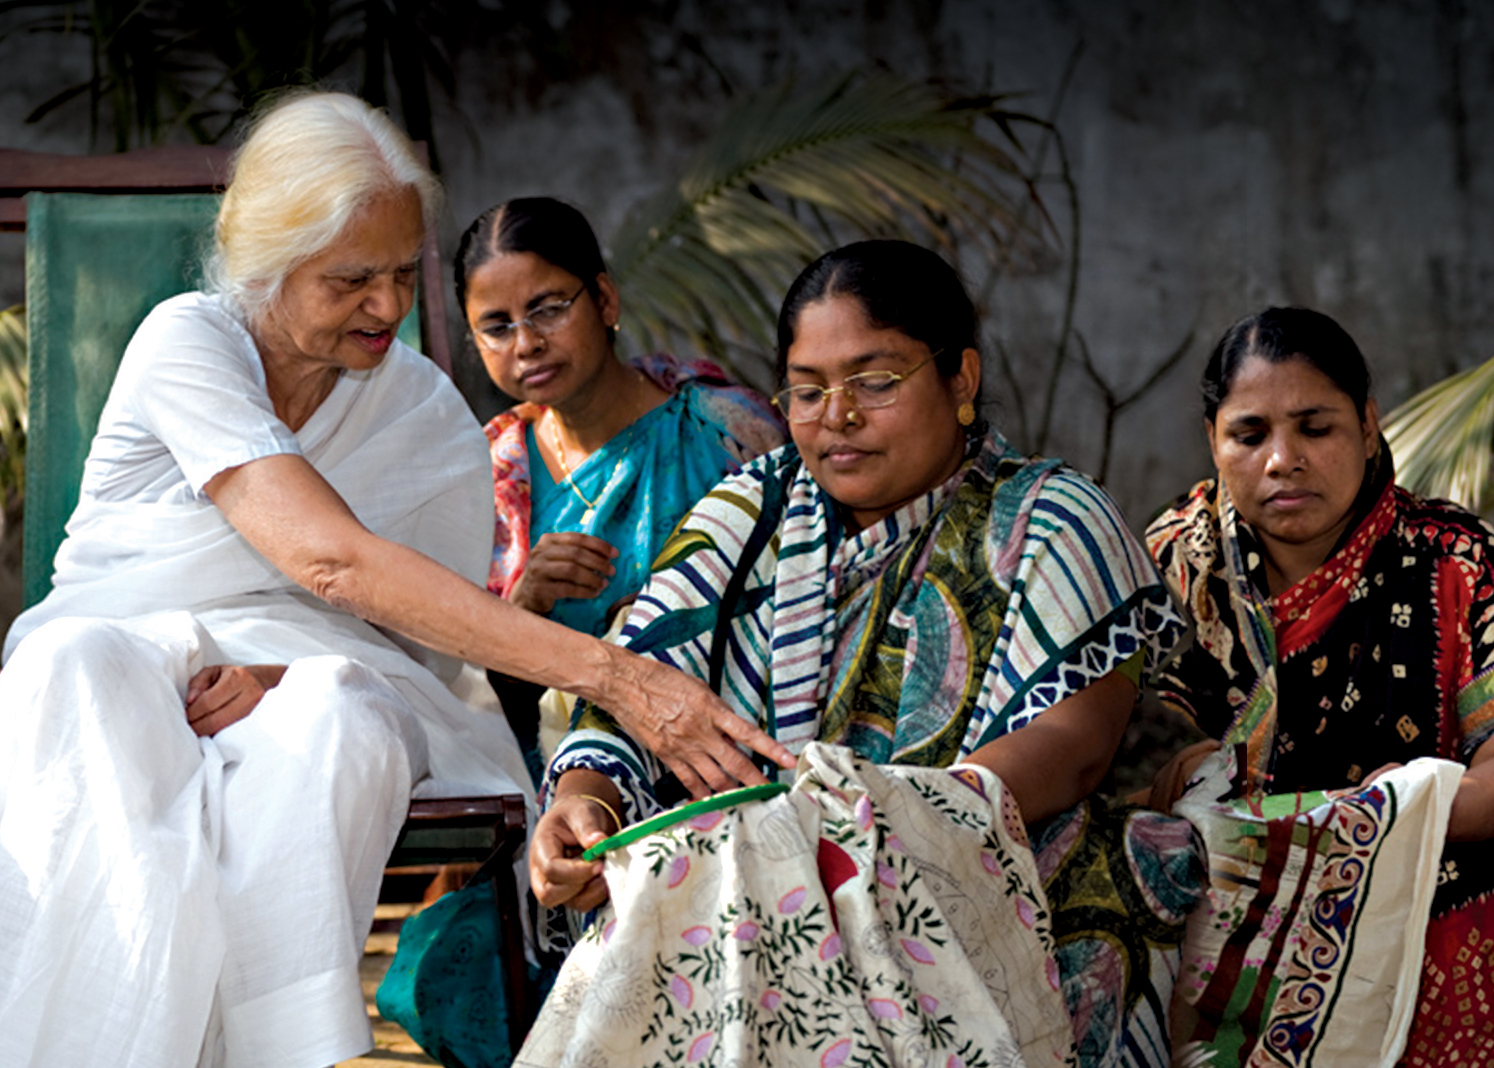 Image of Surayia Rahman with three fellow artisan embroiderers. One woman has an embroidery hoop and Surayia is seen guiding the embroiderer while the other two women watch.